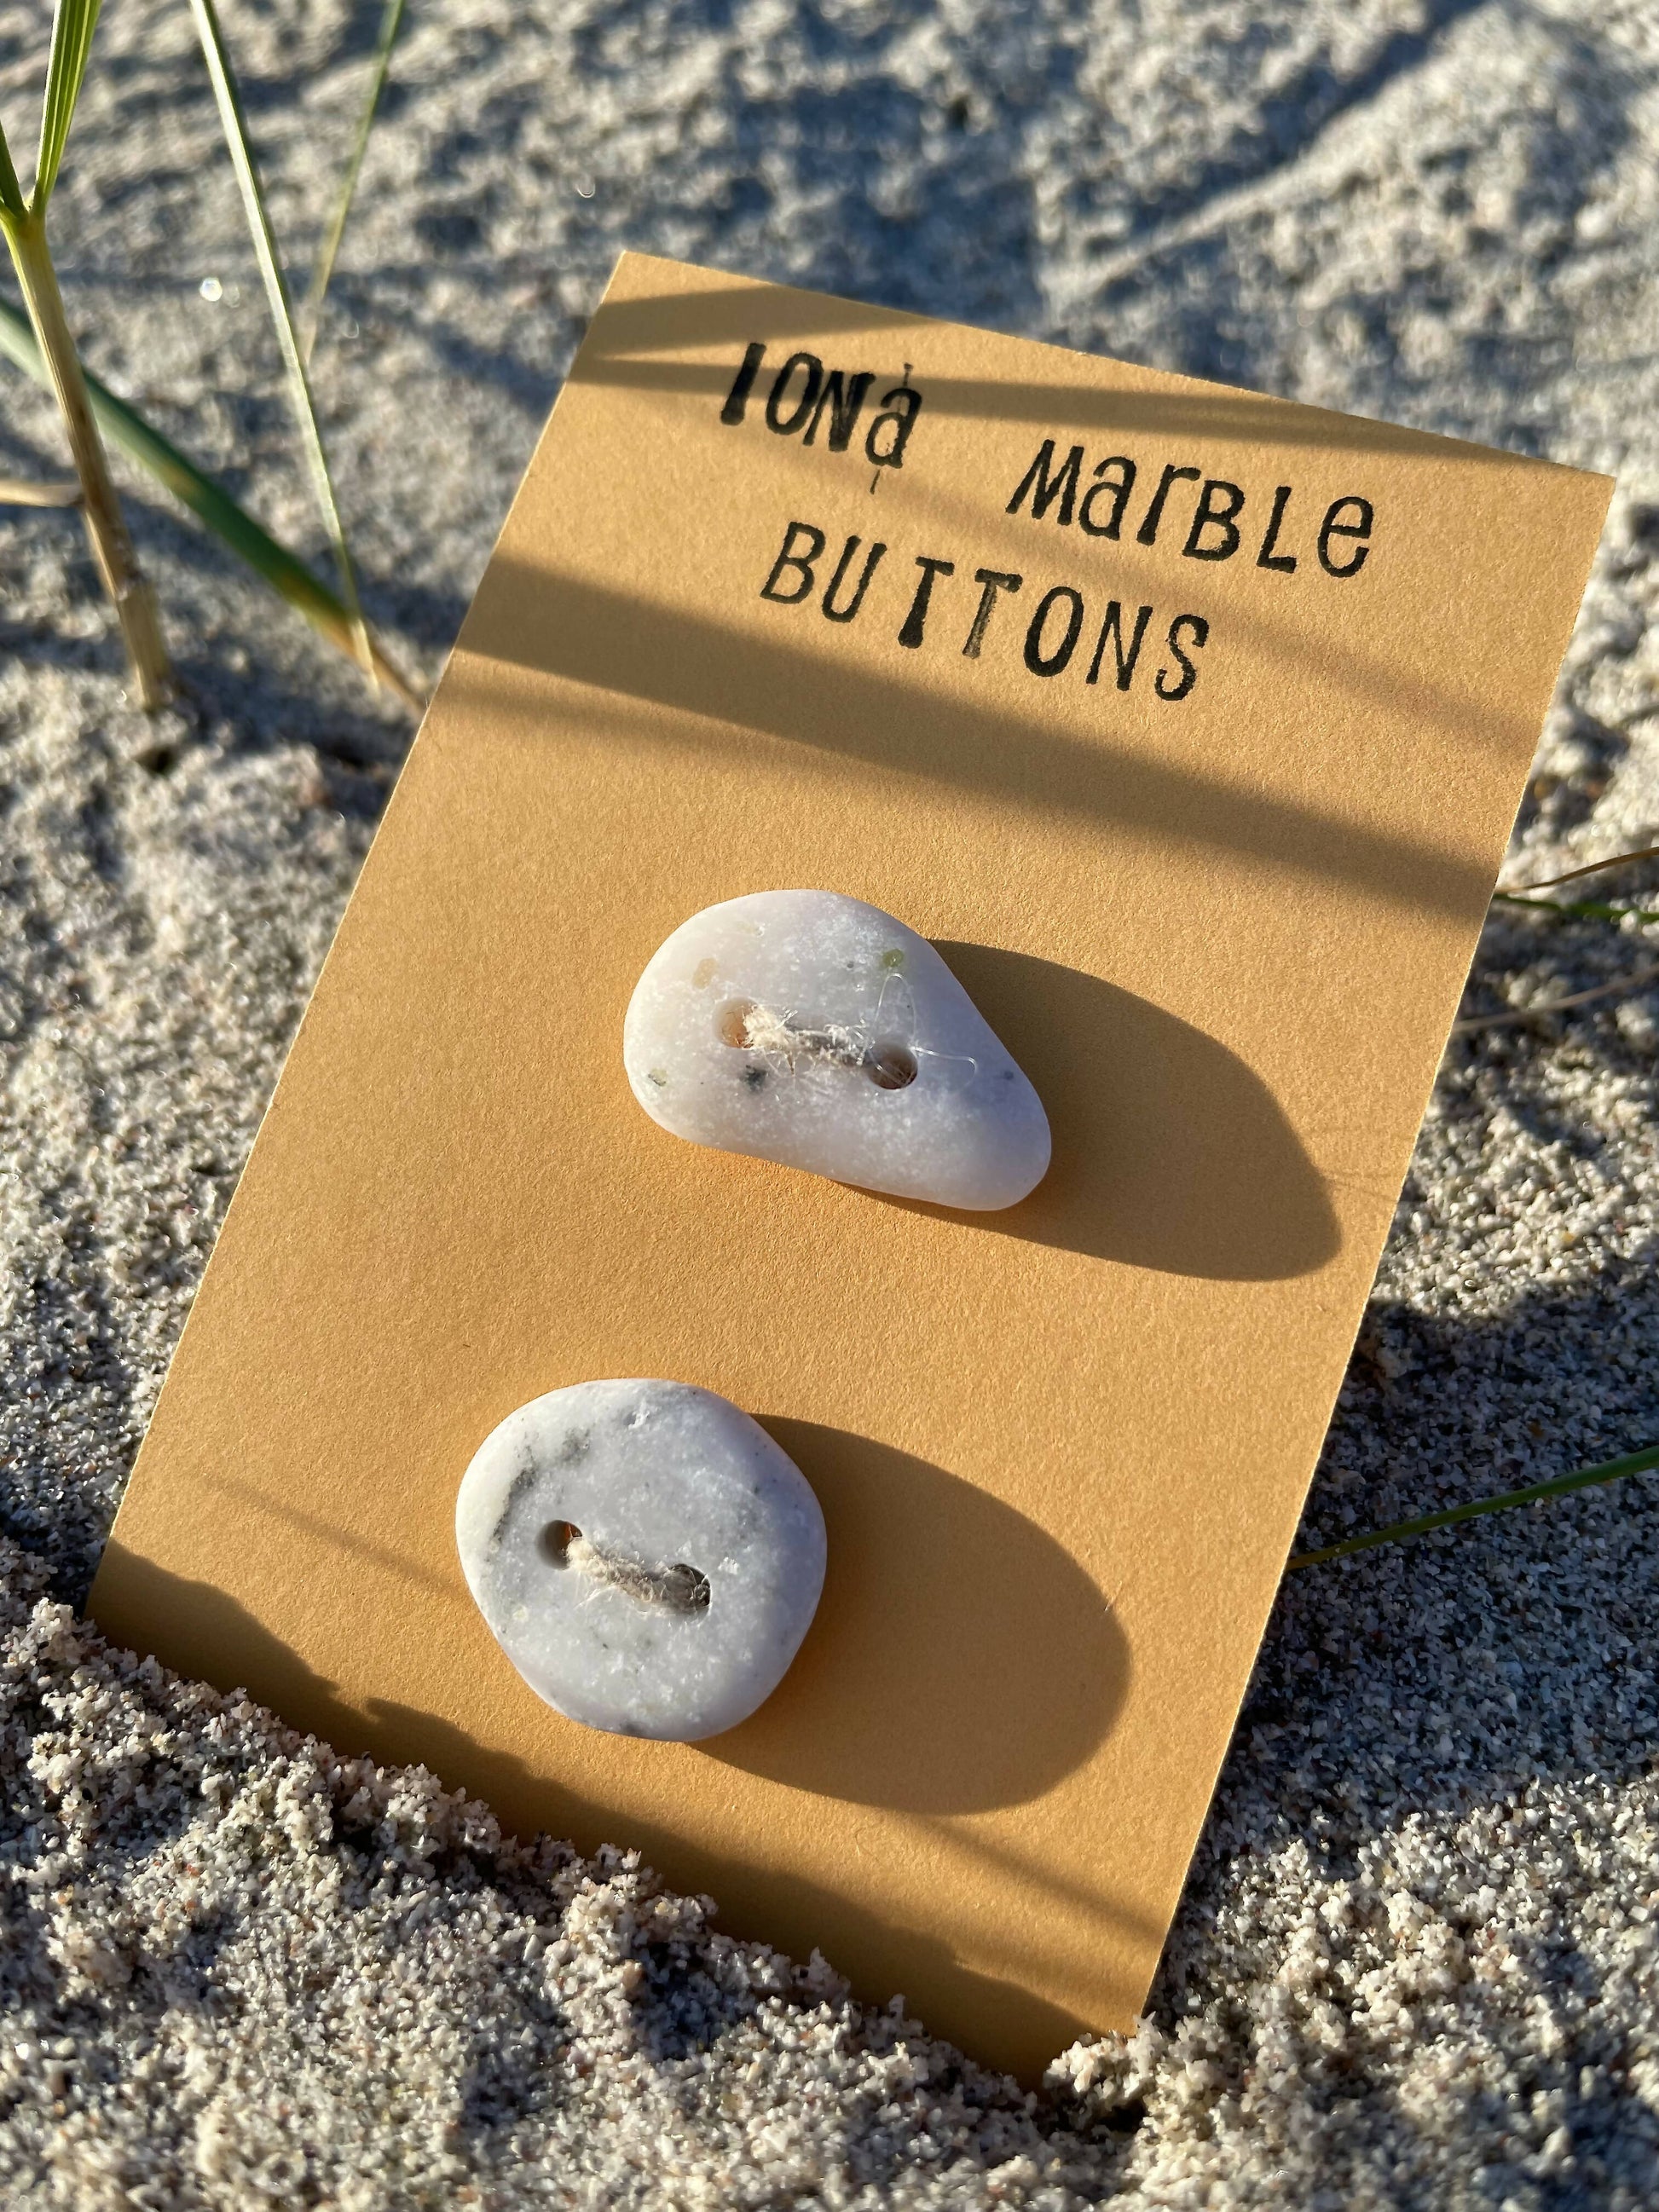 Iona Marble Buttons - 10